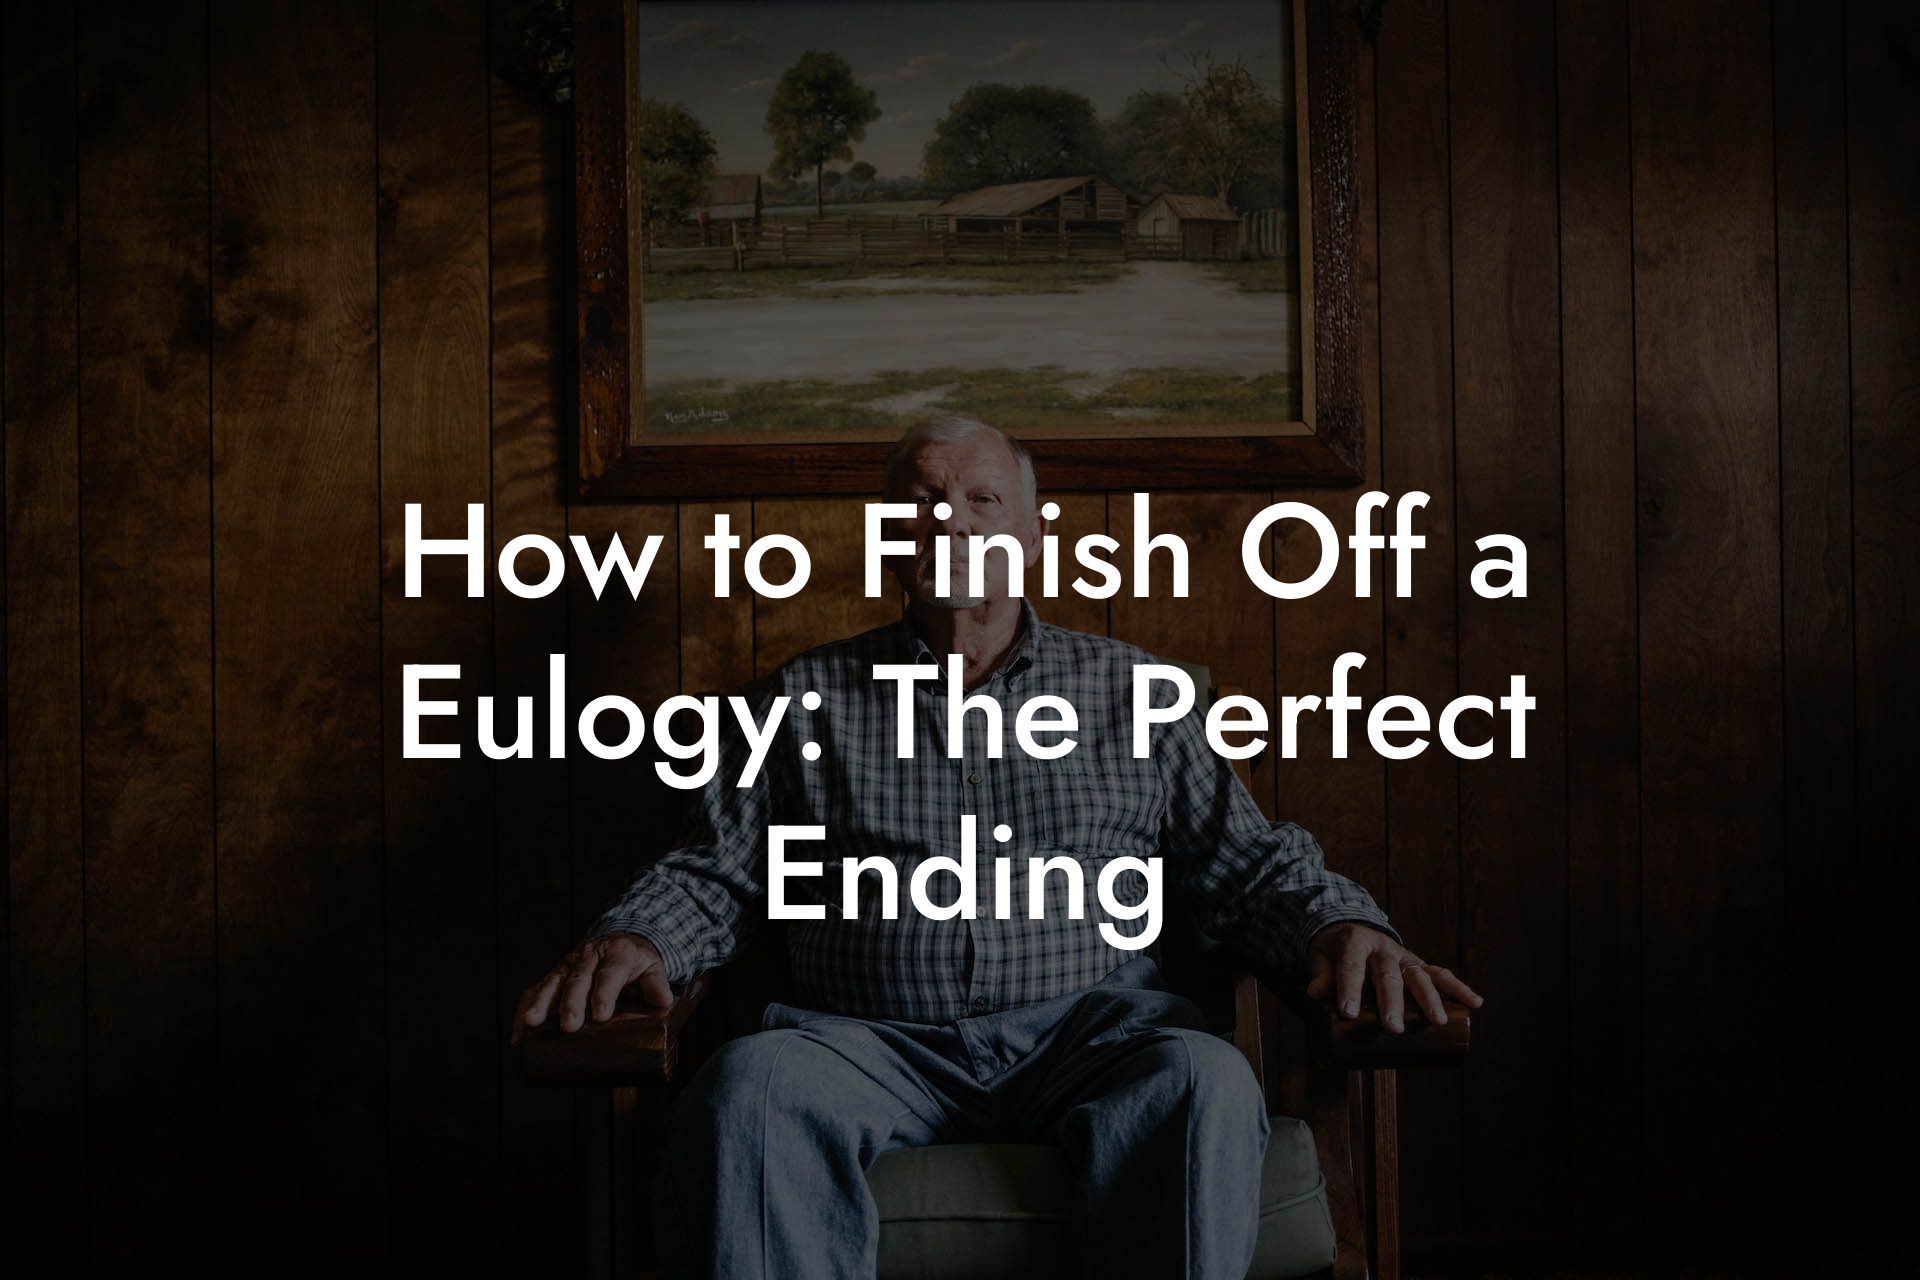 How to Finish Off a Eulogy: The Perfect Ending